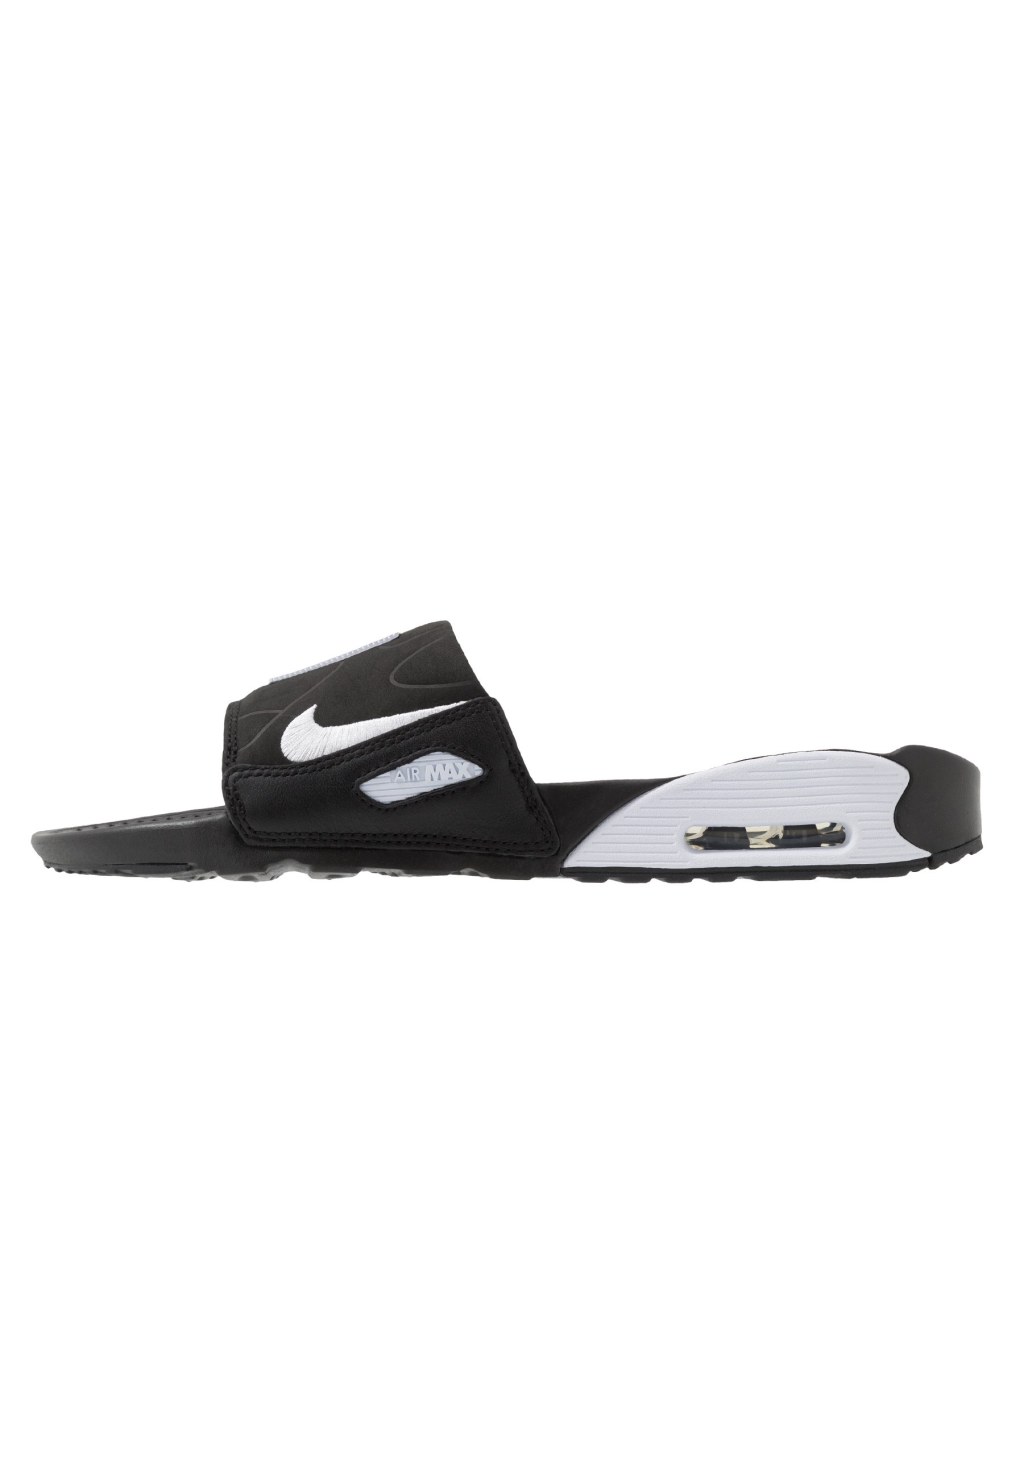 Picture of: Nike Sportswear AIR MAX  SLIDE – Pantolette flach – black/white